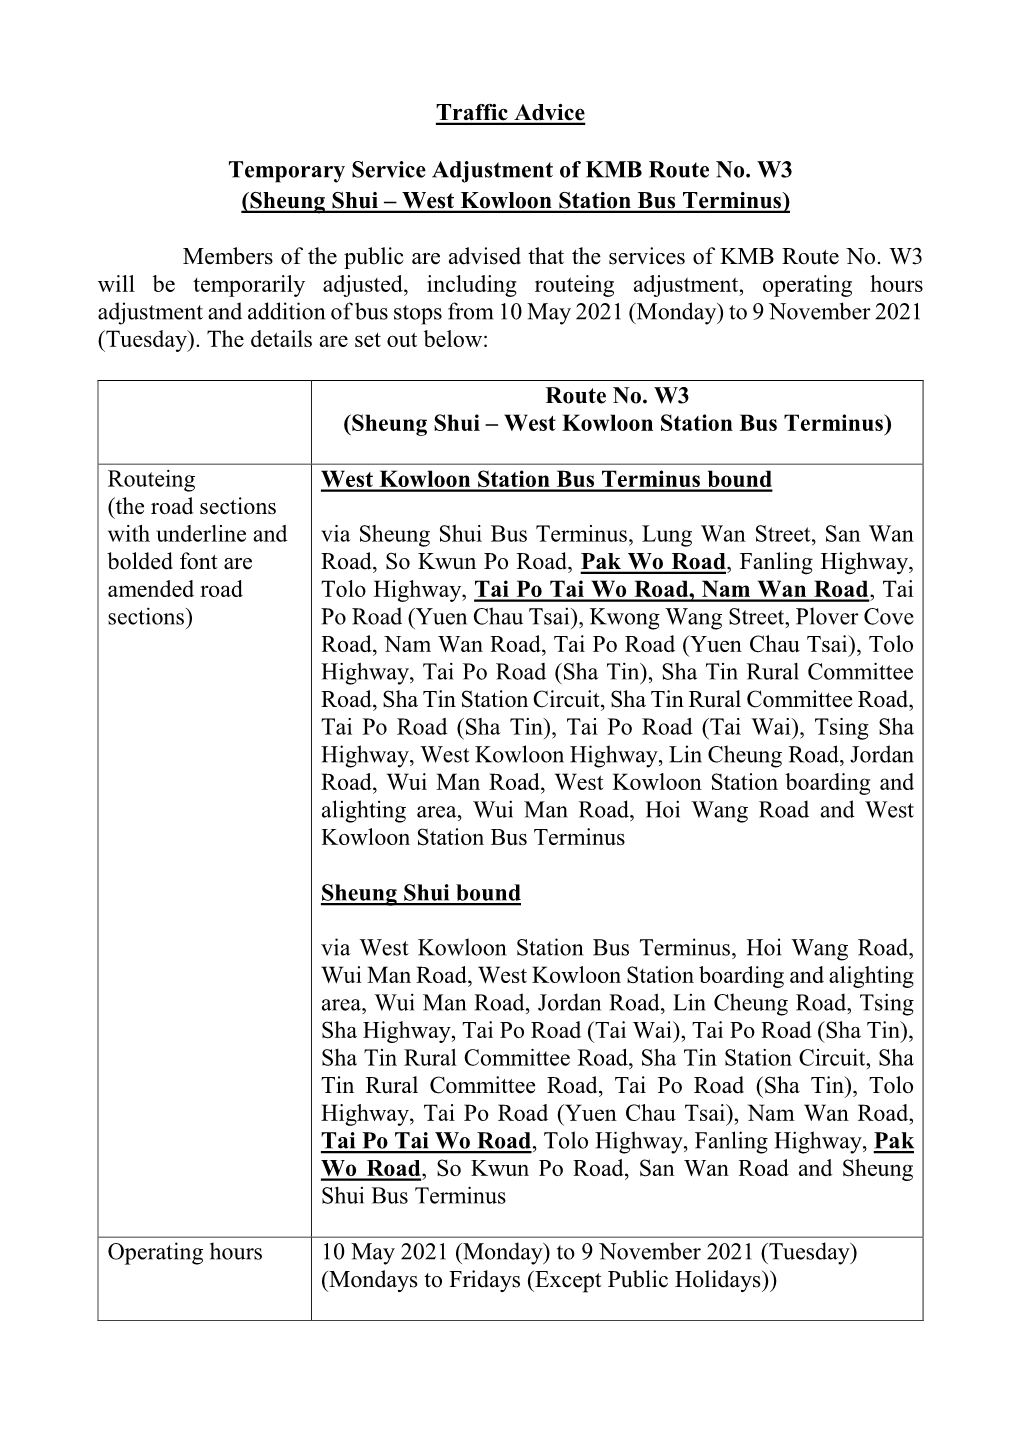 Traffic Advice Temporary Service Adjustment of KMB Route No. W3 (Sheung Shui – West Kowloon Station Bus Terminus) Members of T